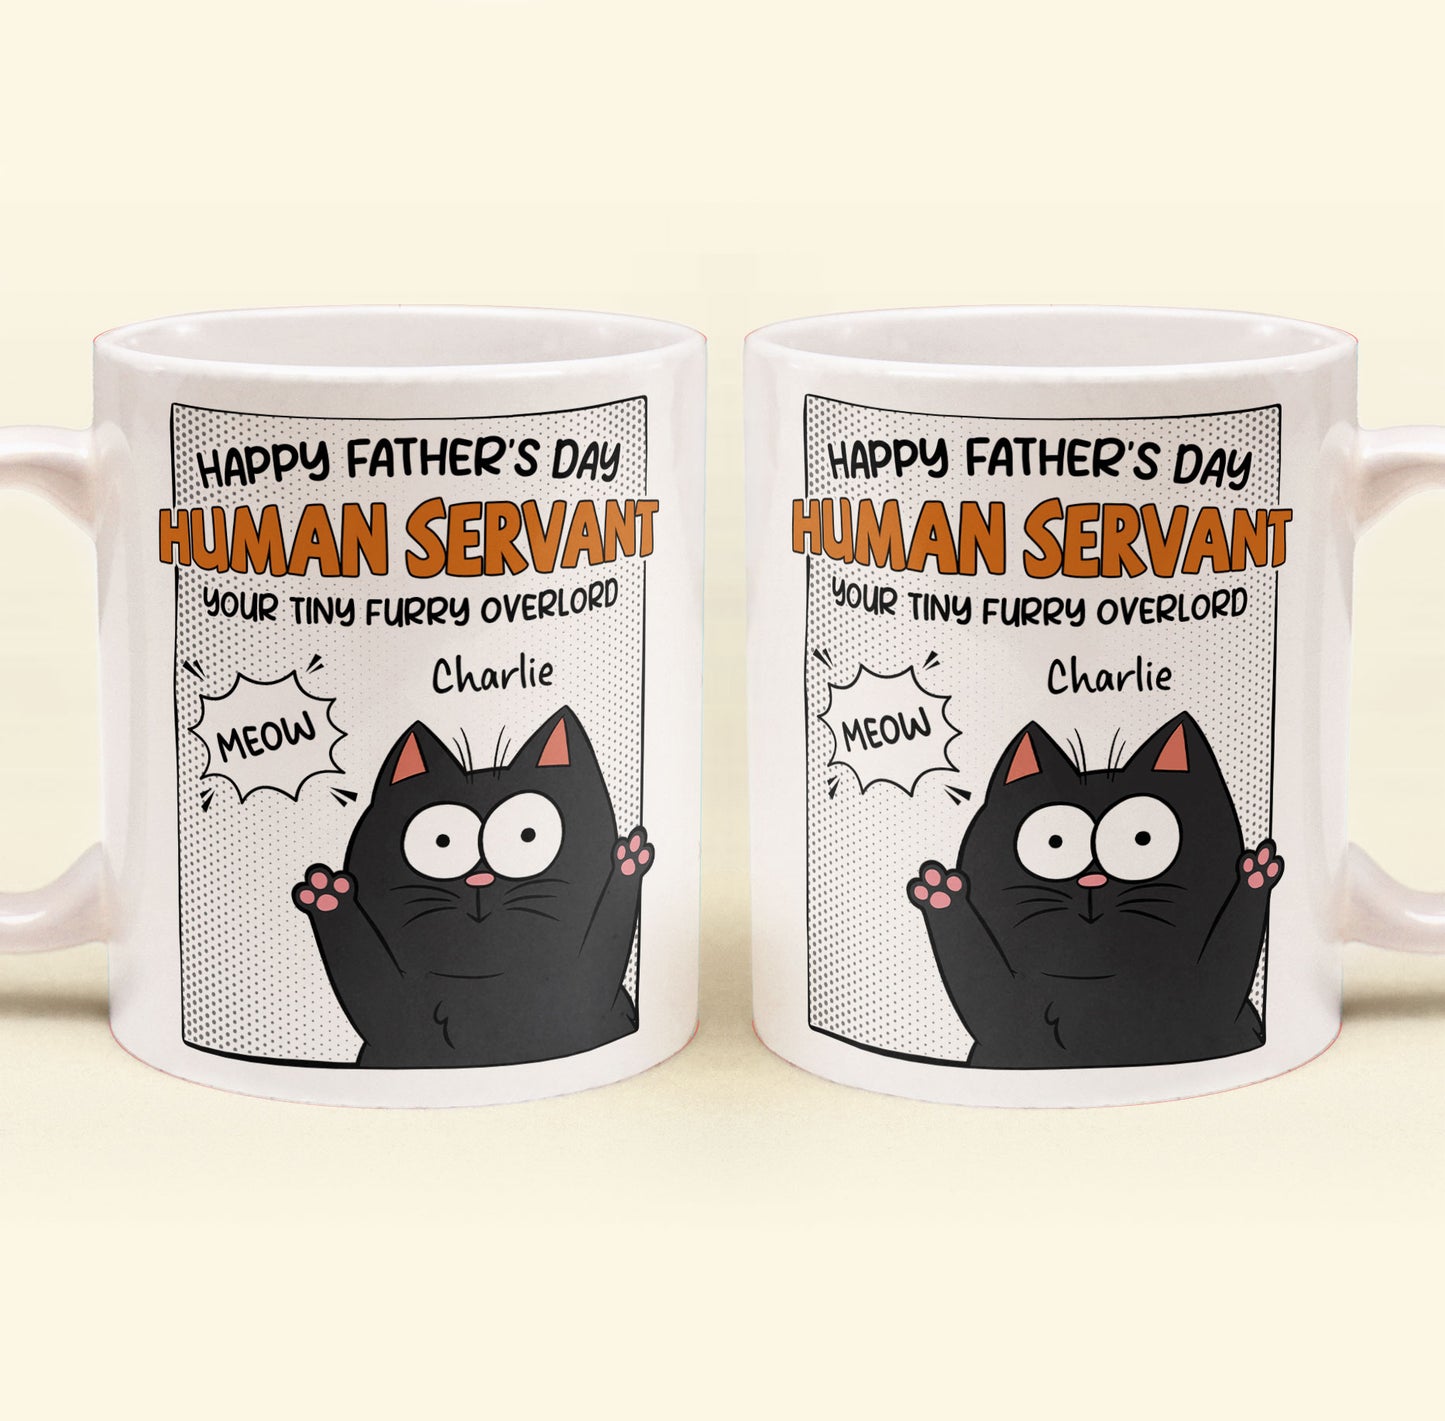 Happy Father's Day Human Servant - Personalized Mug for Cat Dad